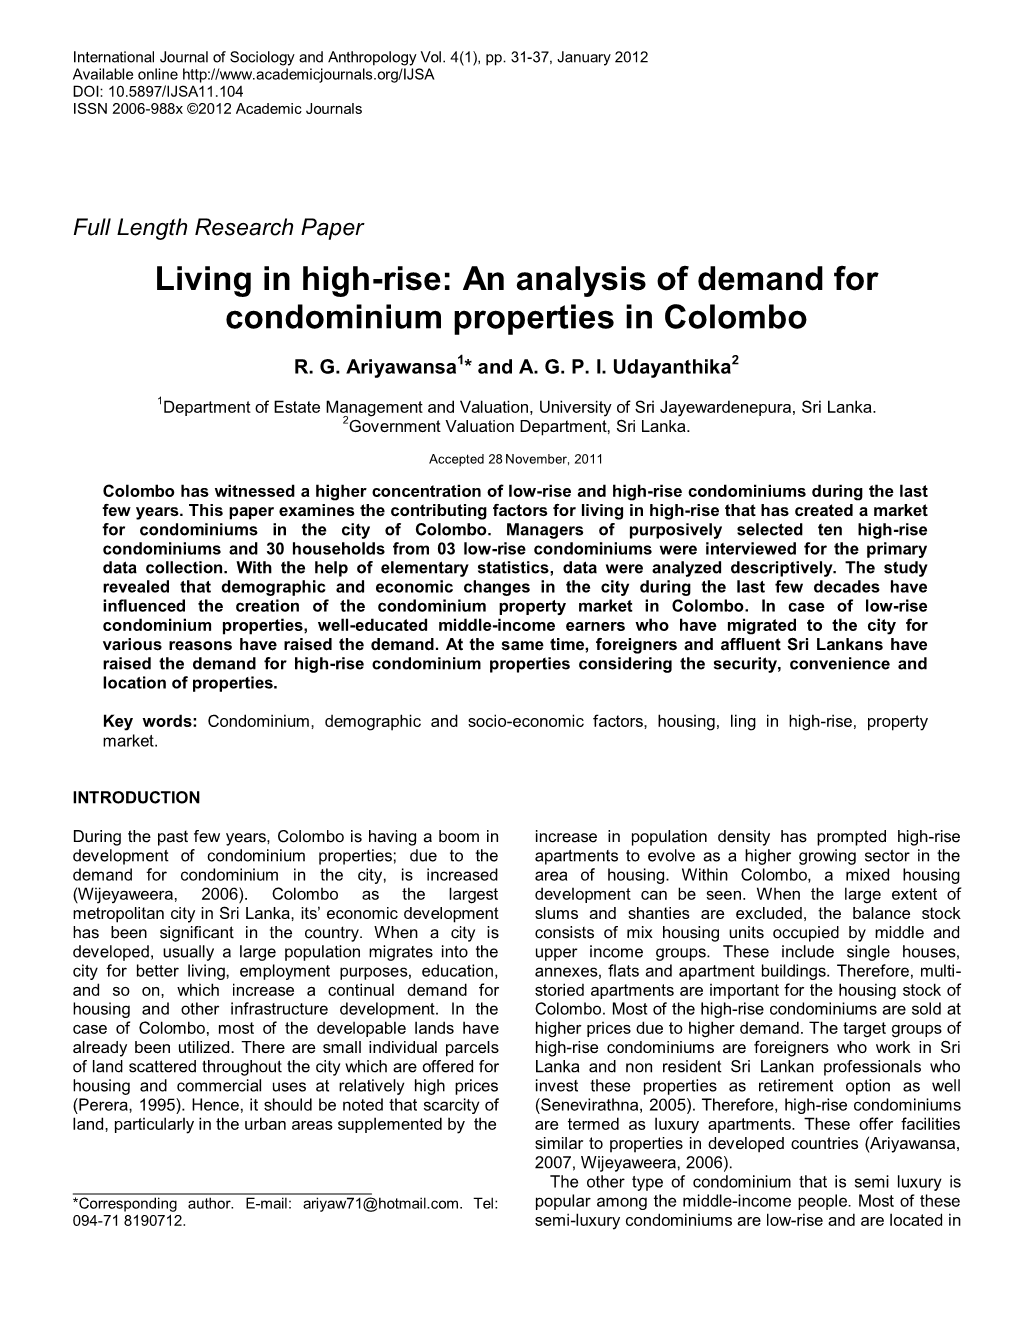 An Empirical Study on Demand for Condominium in Colombo